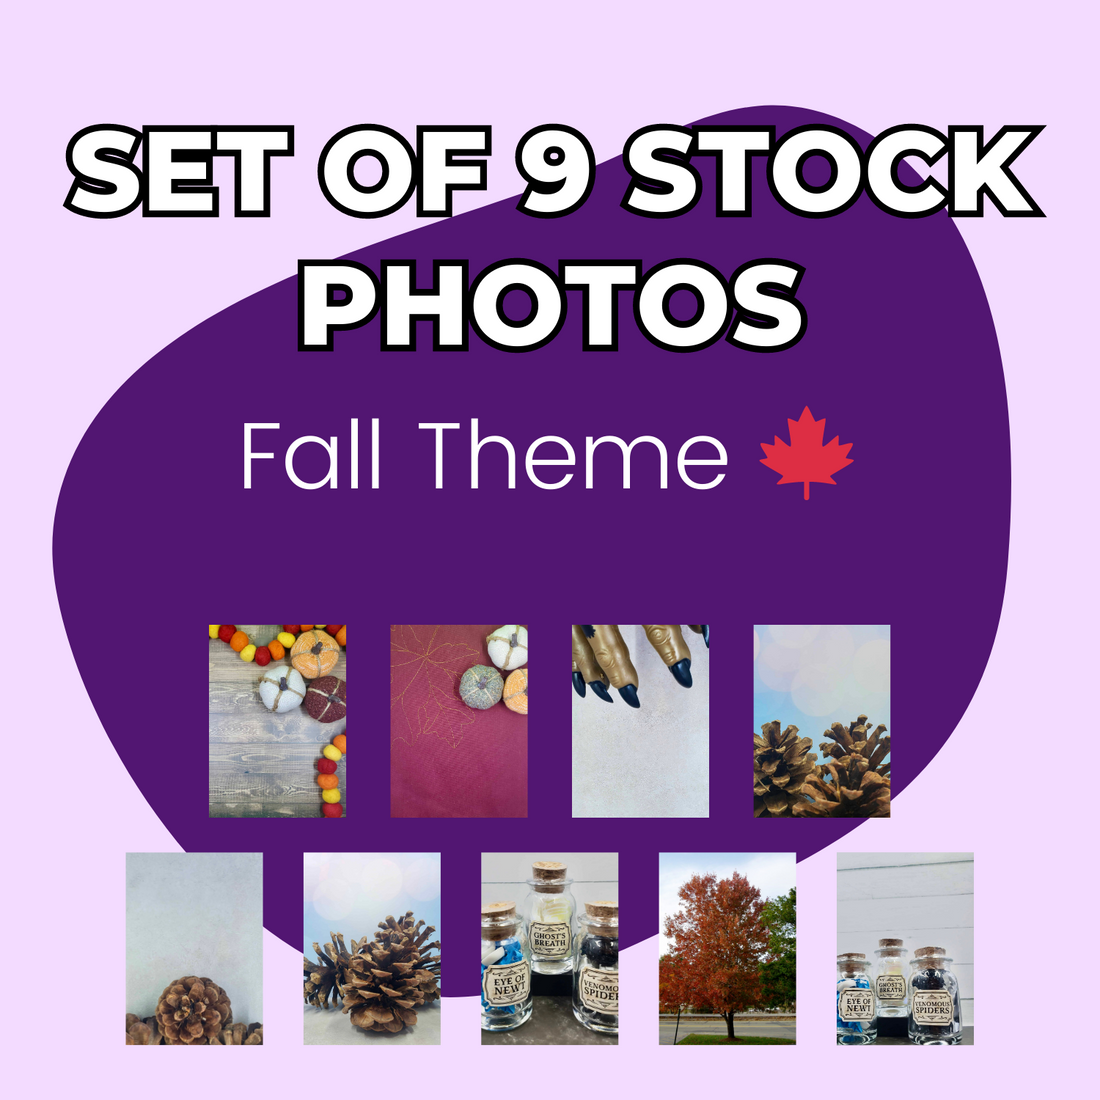 Set of 9 Fall Themed Stock Photos by Blogger Breakthrough Summit.